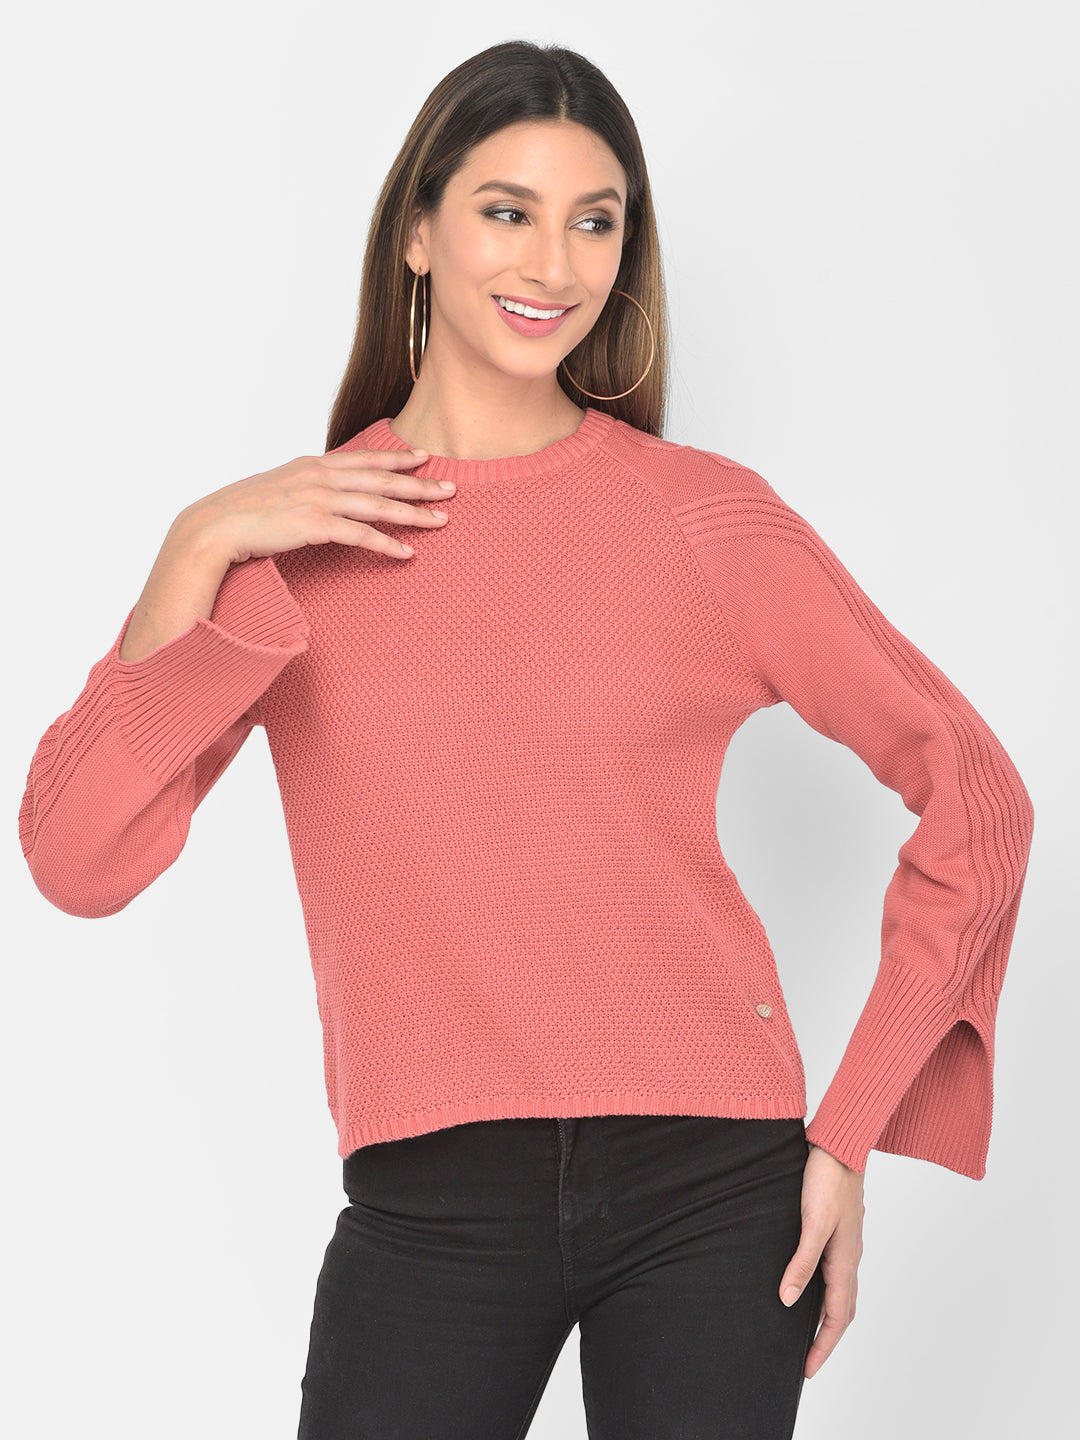 Sweater With Cable Design on Sleeves